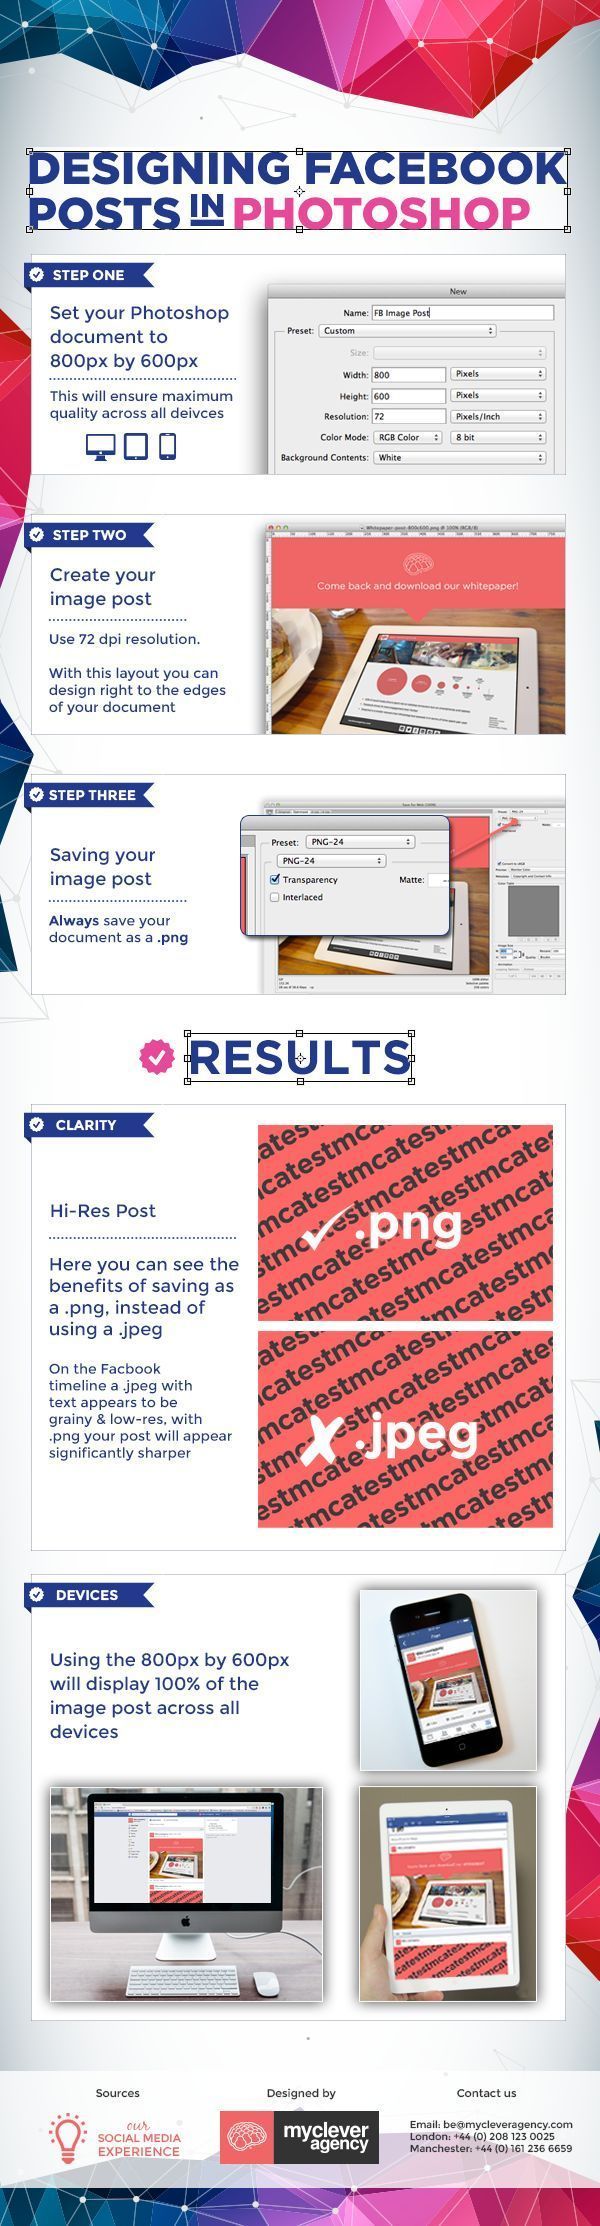 1531805864_90_Marketing-Infographic-Make-the-best-Facebook-photos-in-Photoshop-and-avoid-a-Facebook-Photoshop-fail Marketing Infographic : Make the best Facebook photos in Photoshop - and avoid a Facebook Photoshop fail...